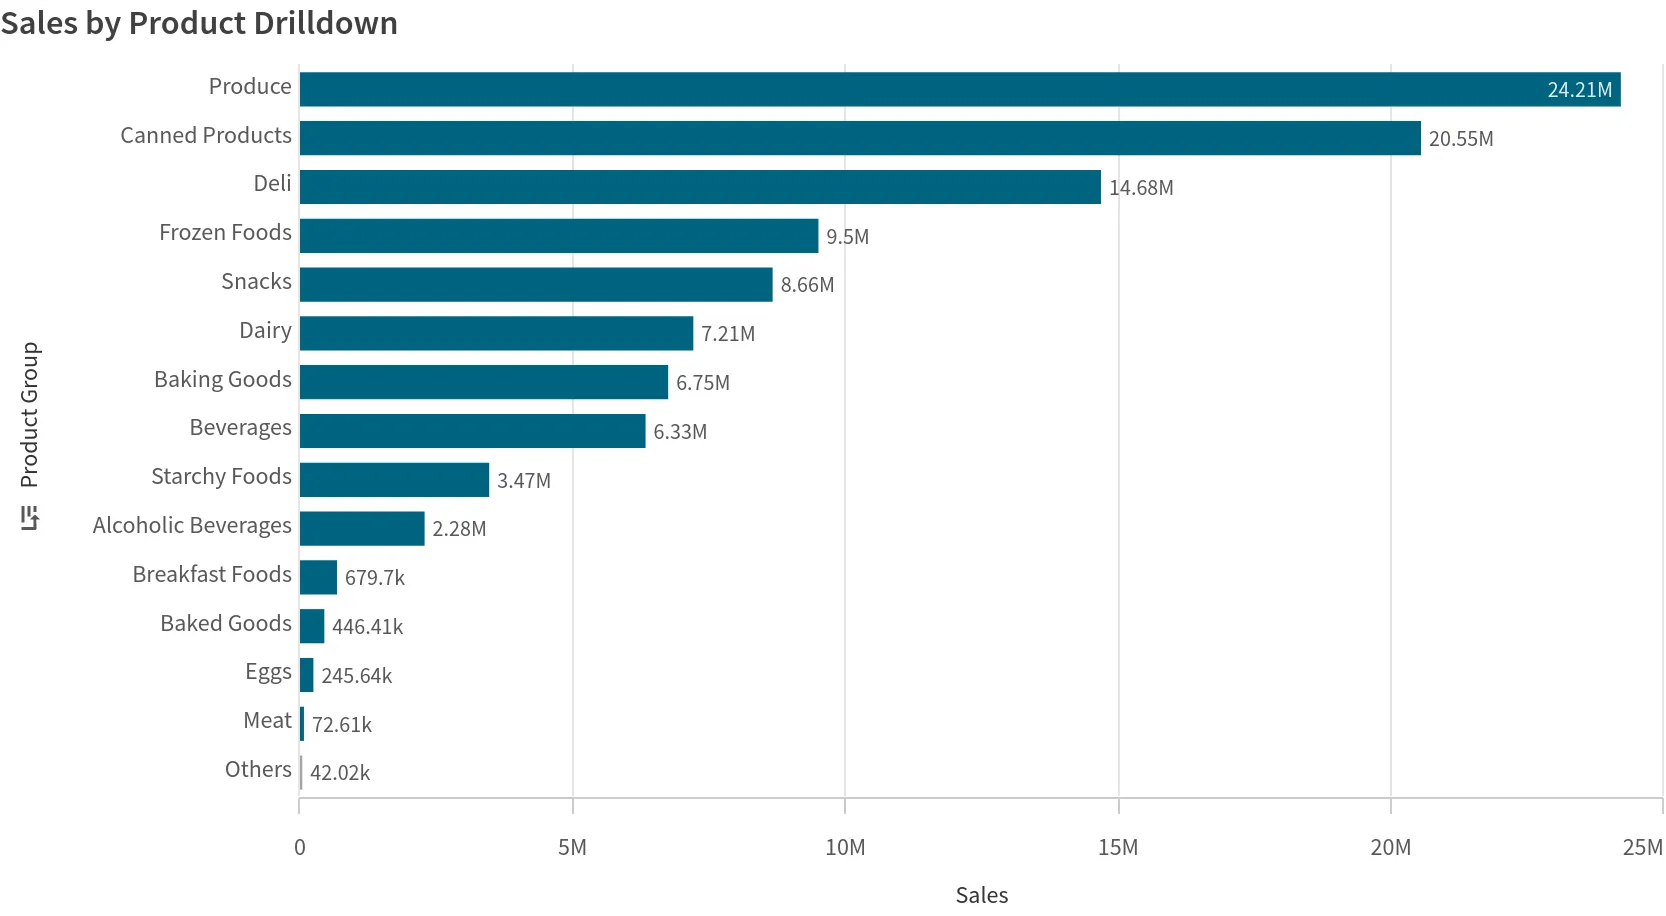 Bar chart showing total sales by product.